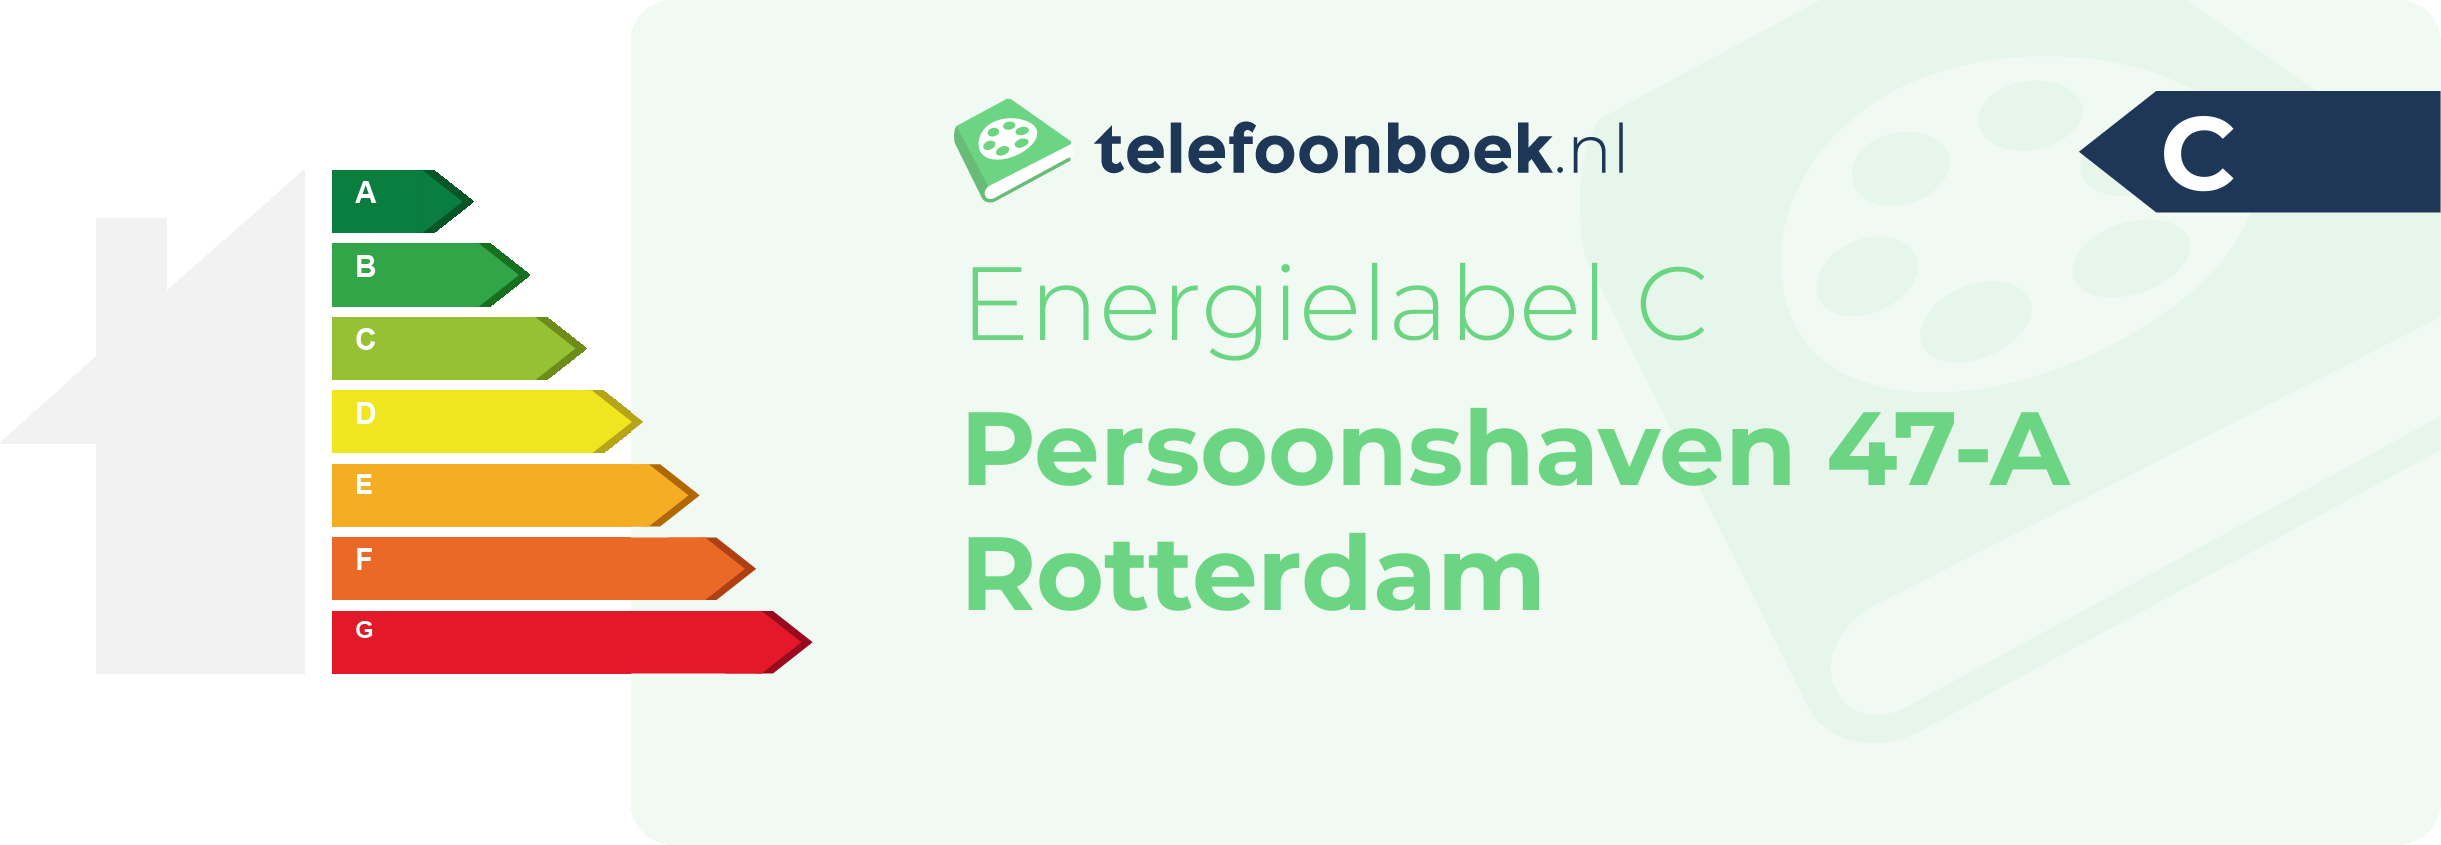 Energielabel Persoonshaven 47-A Rotterdam